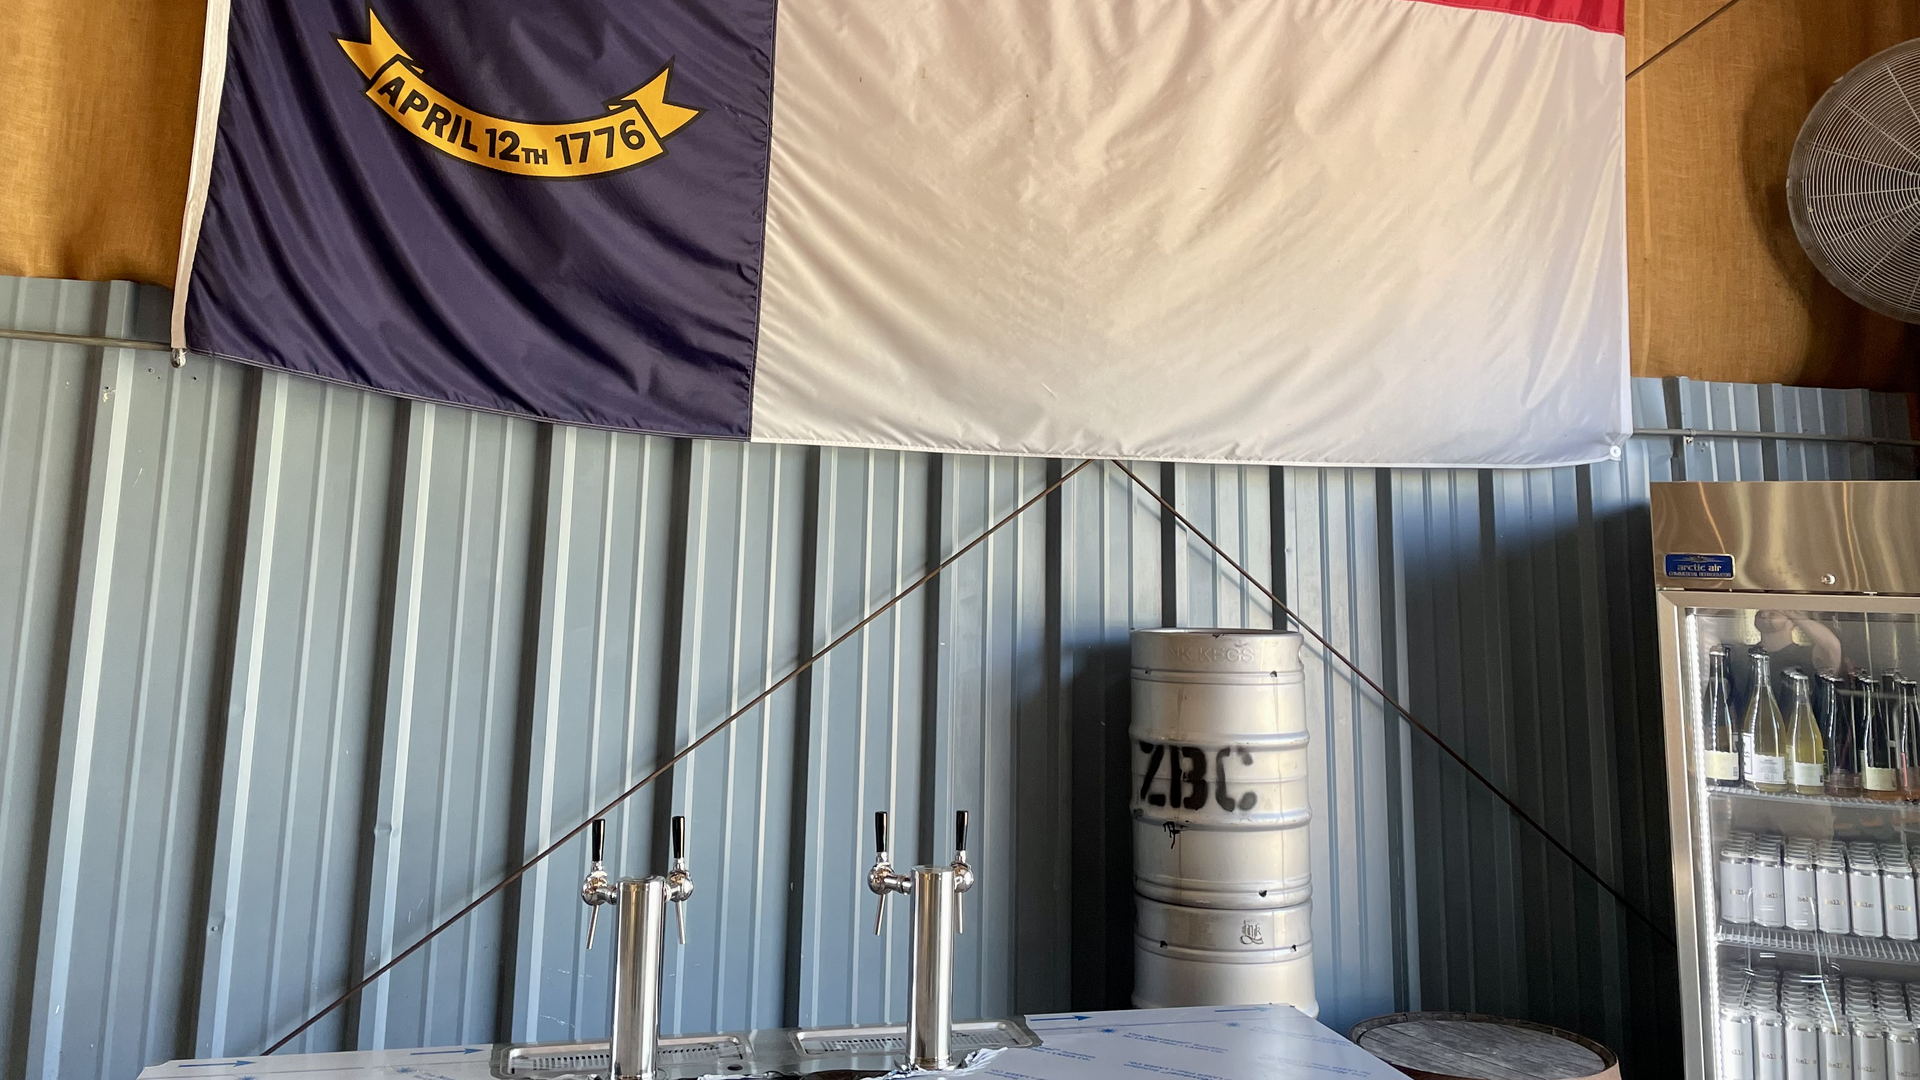 A North Carolina state flag hangs above the taps at Zillicoah brewery outside Asheville.